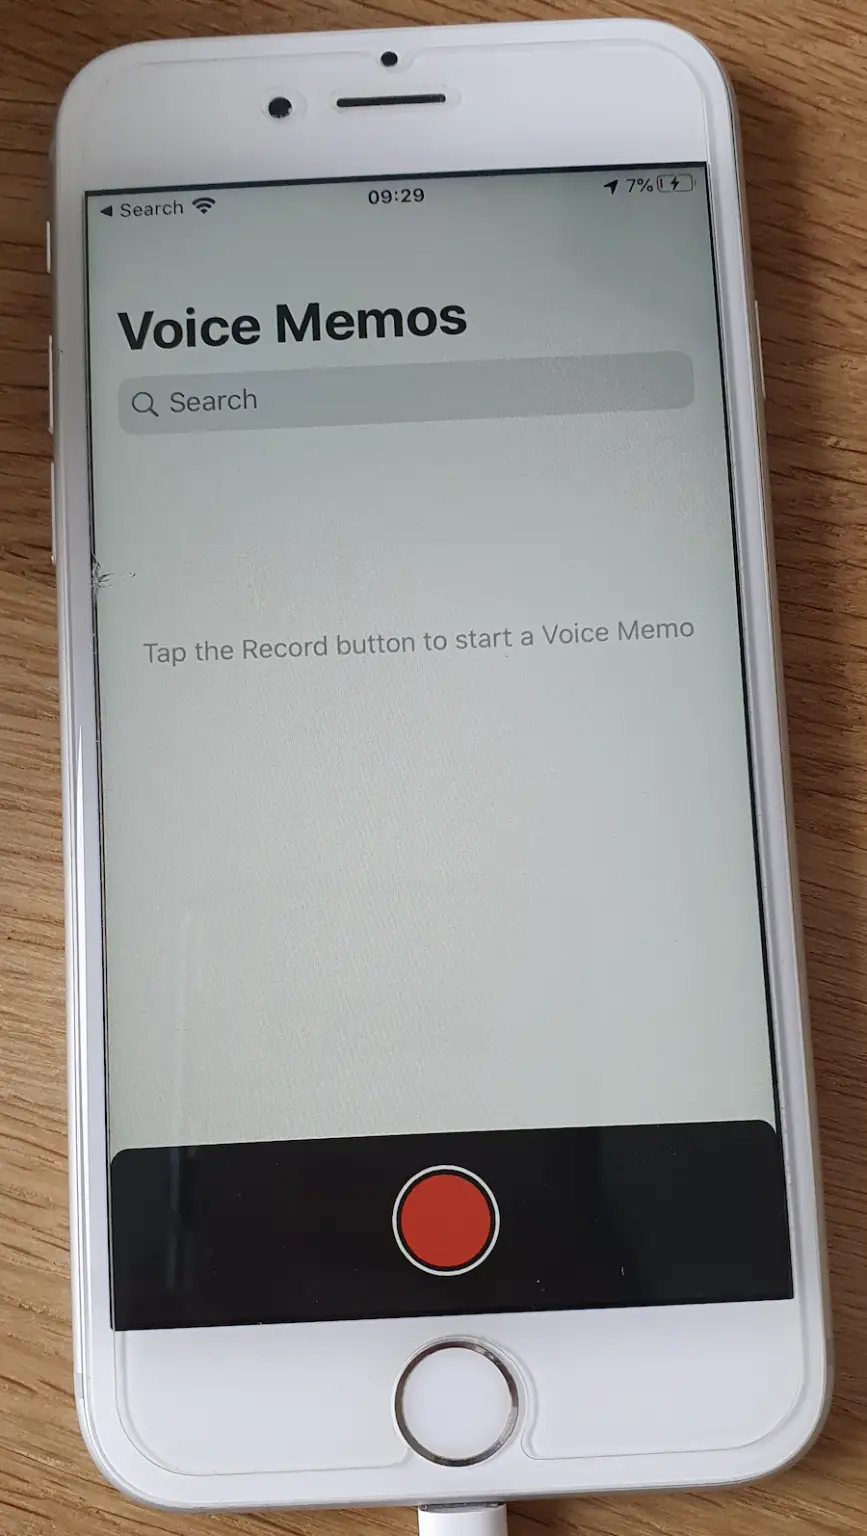 iPhone voice recording with the Voice Memos app